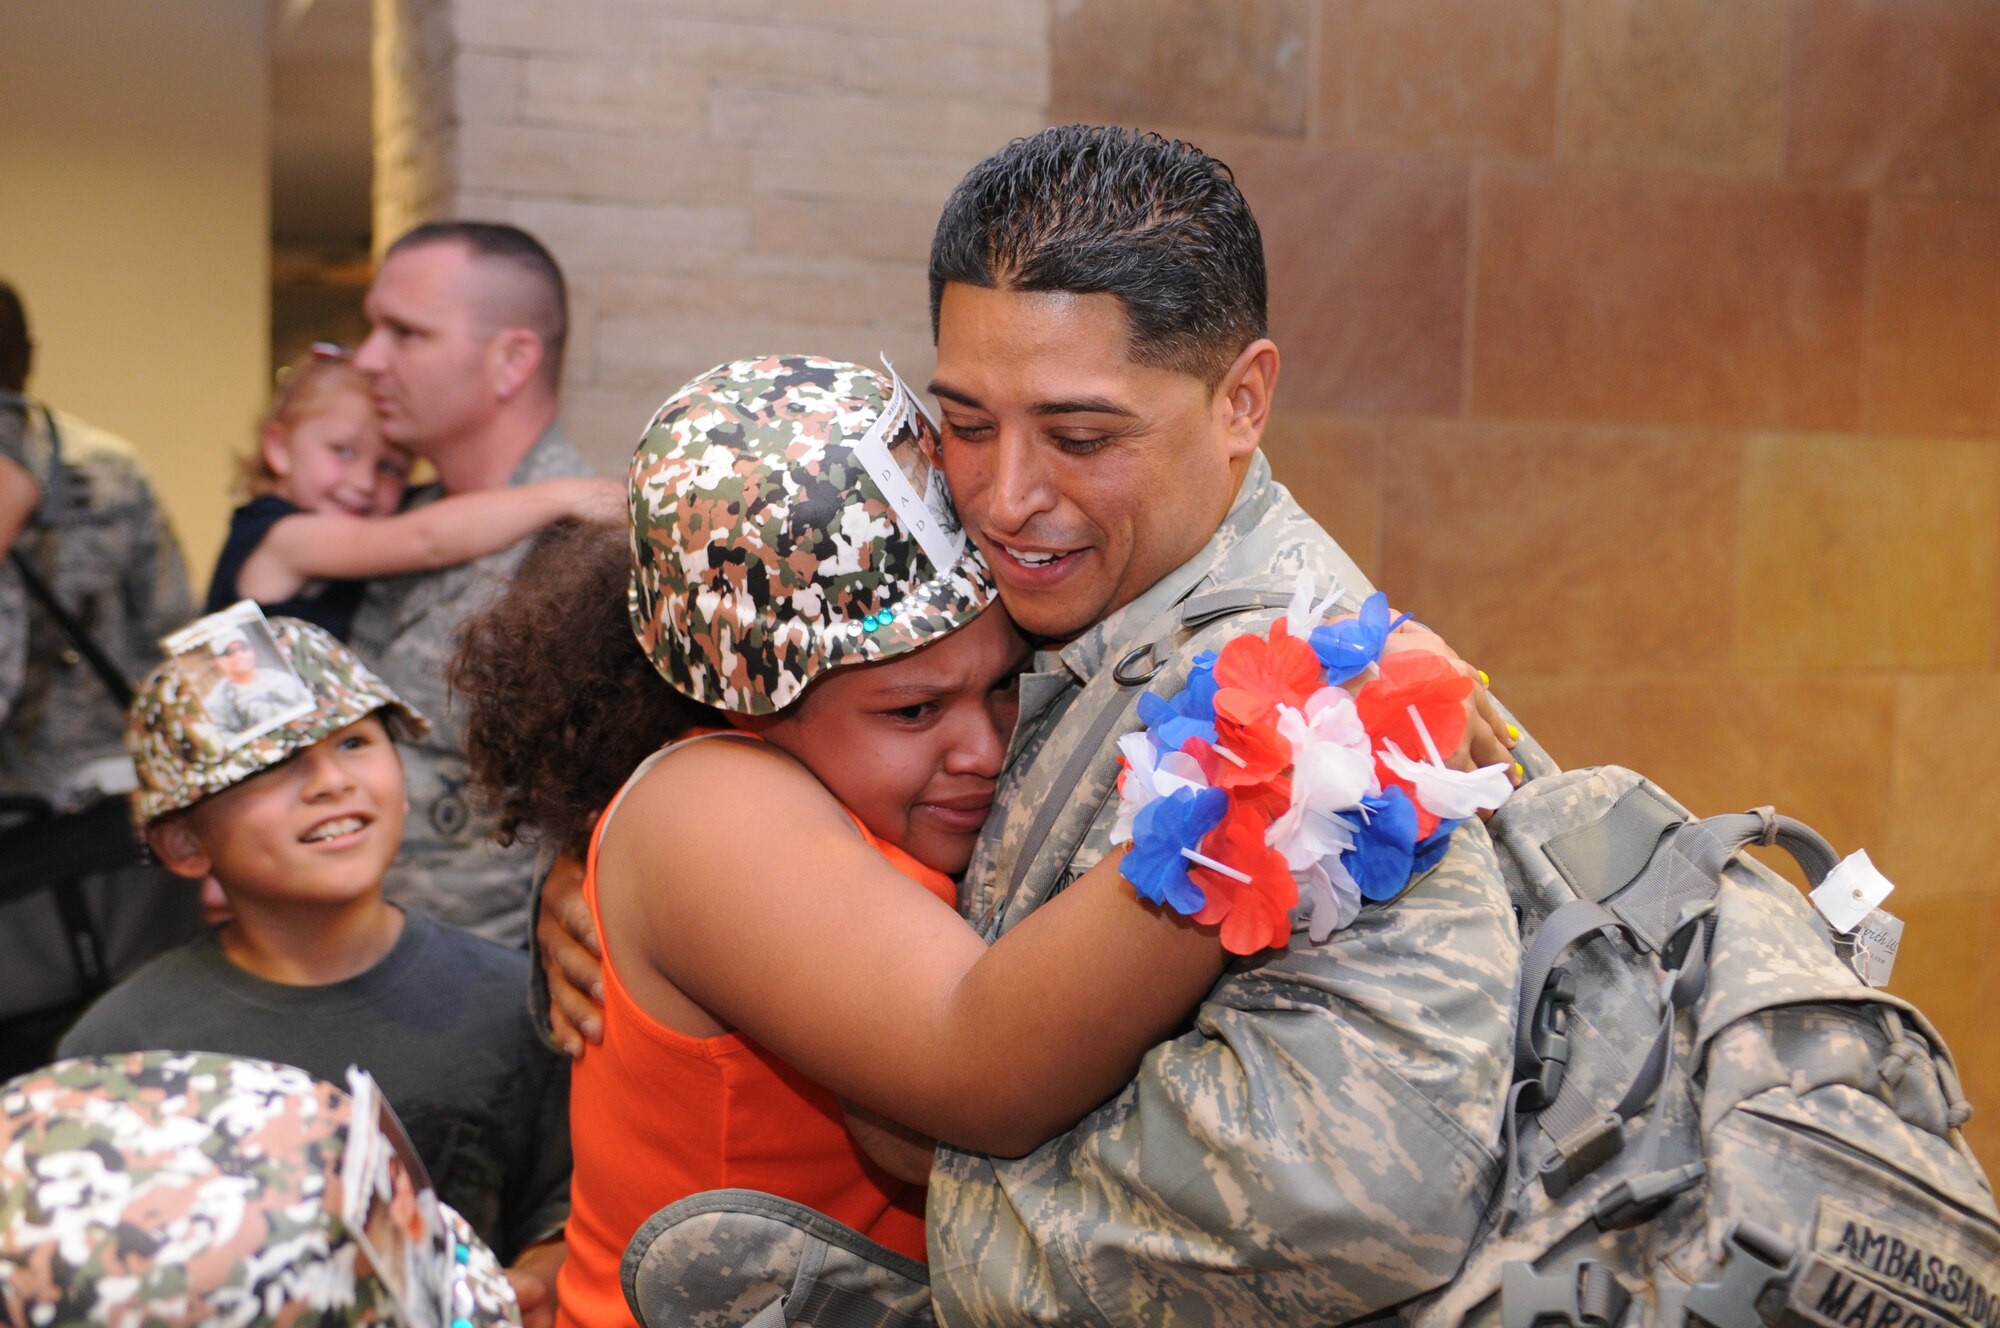 Tech. Sgt. Ernesto Marquez is welcomed home after a five-month deployment to Iraq, June 7. Family and friends celebrated the return of 29 security forces Airmen assigned to the 162nd Fighter Wing at Tucson International Airport. (Air Force photo by Maj. Gabe Johnson)